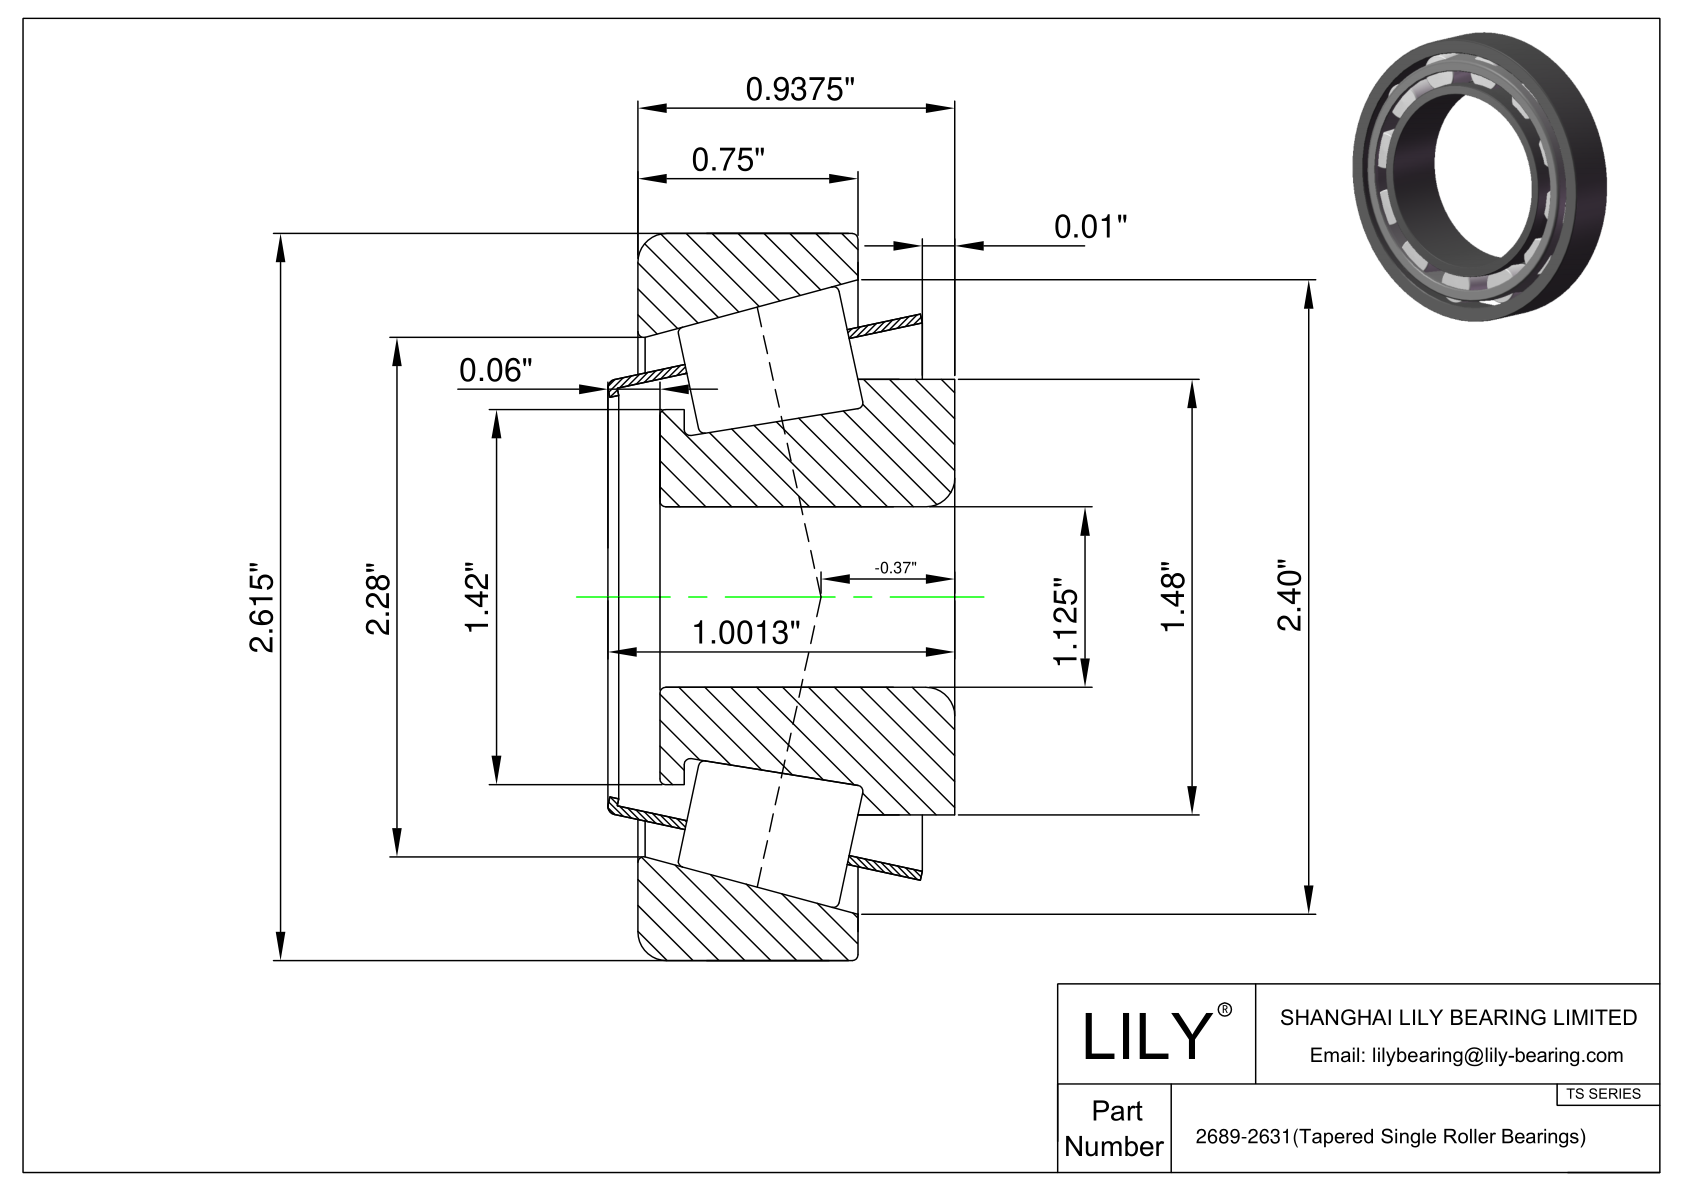 2689-2631 TS (Tapered Single Roller Bearings) (Imperial) cad drawing